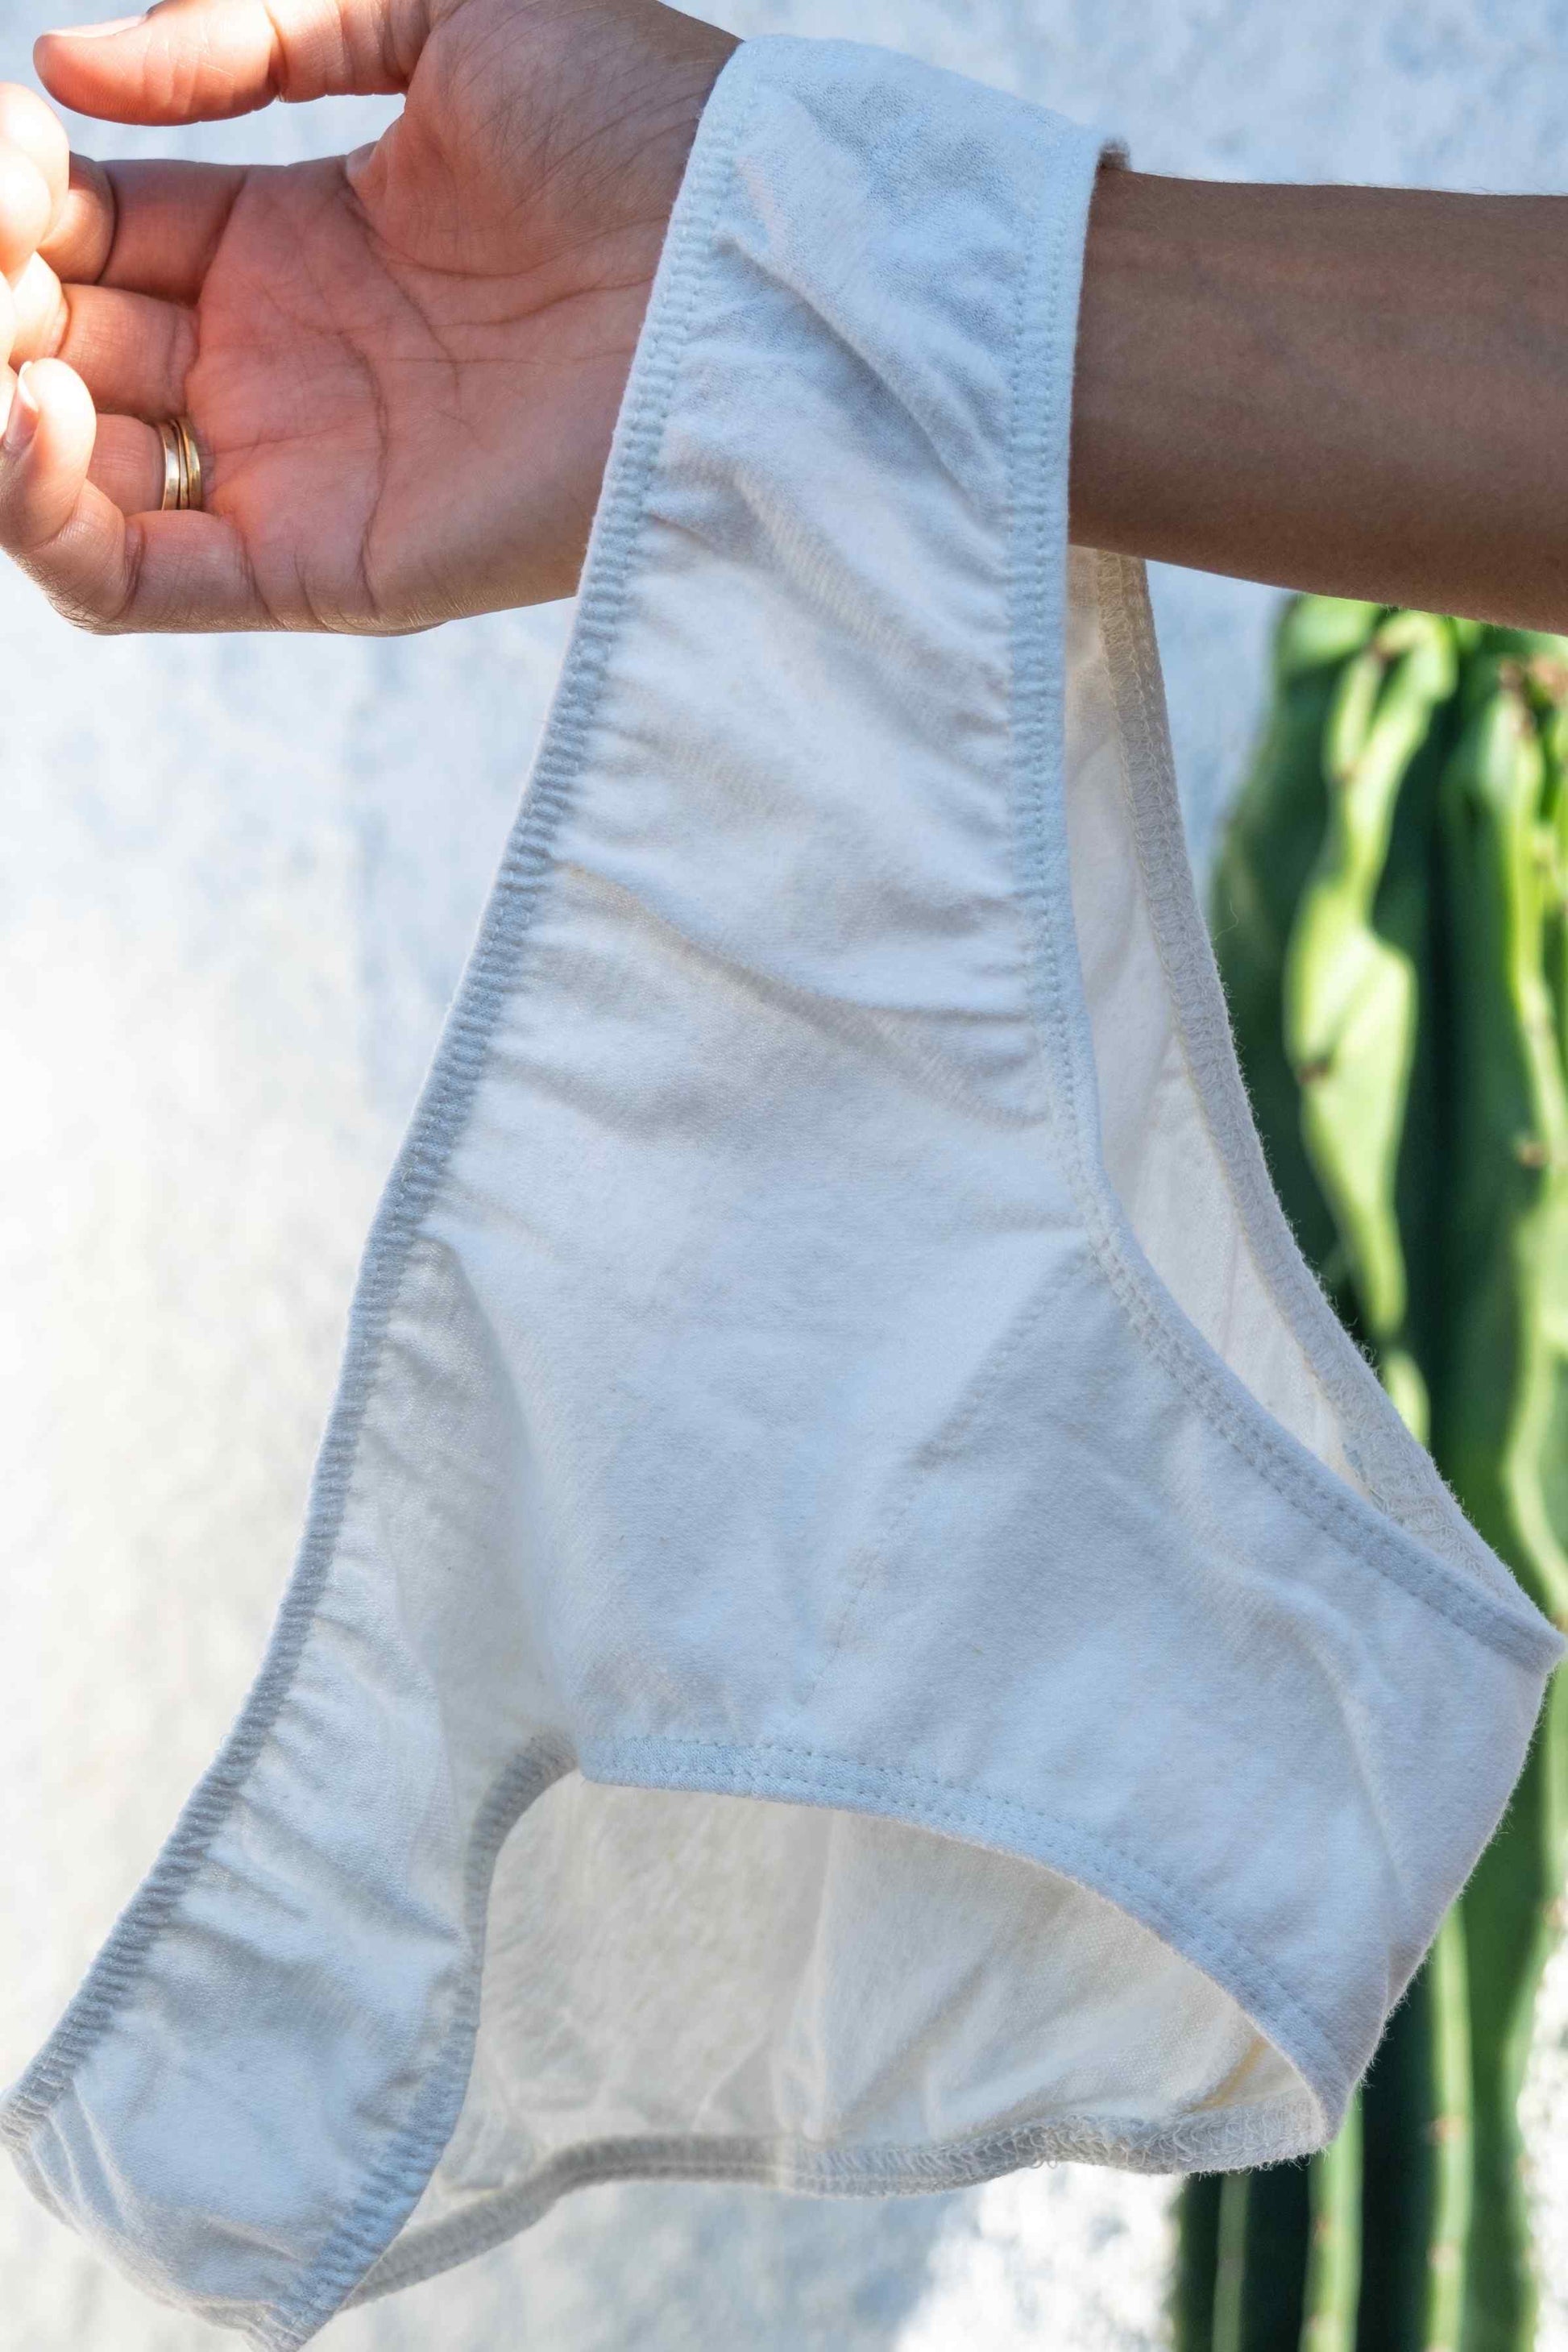 Weathered and Decayed Dirty Underwear for Men Stock Photo - Image